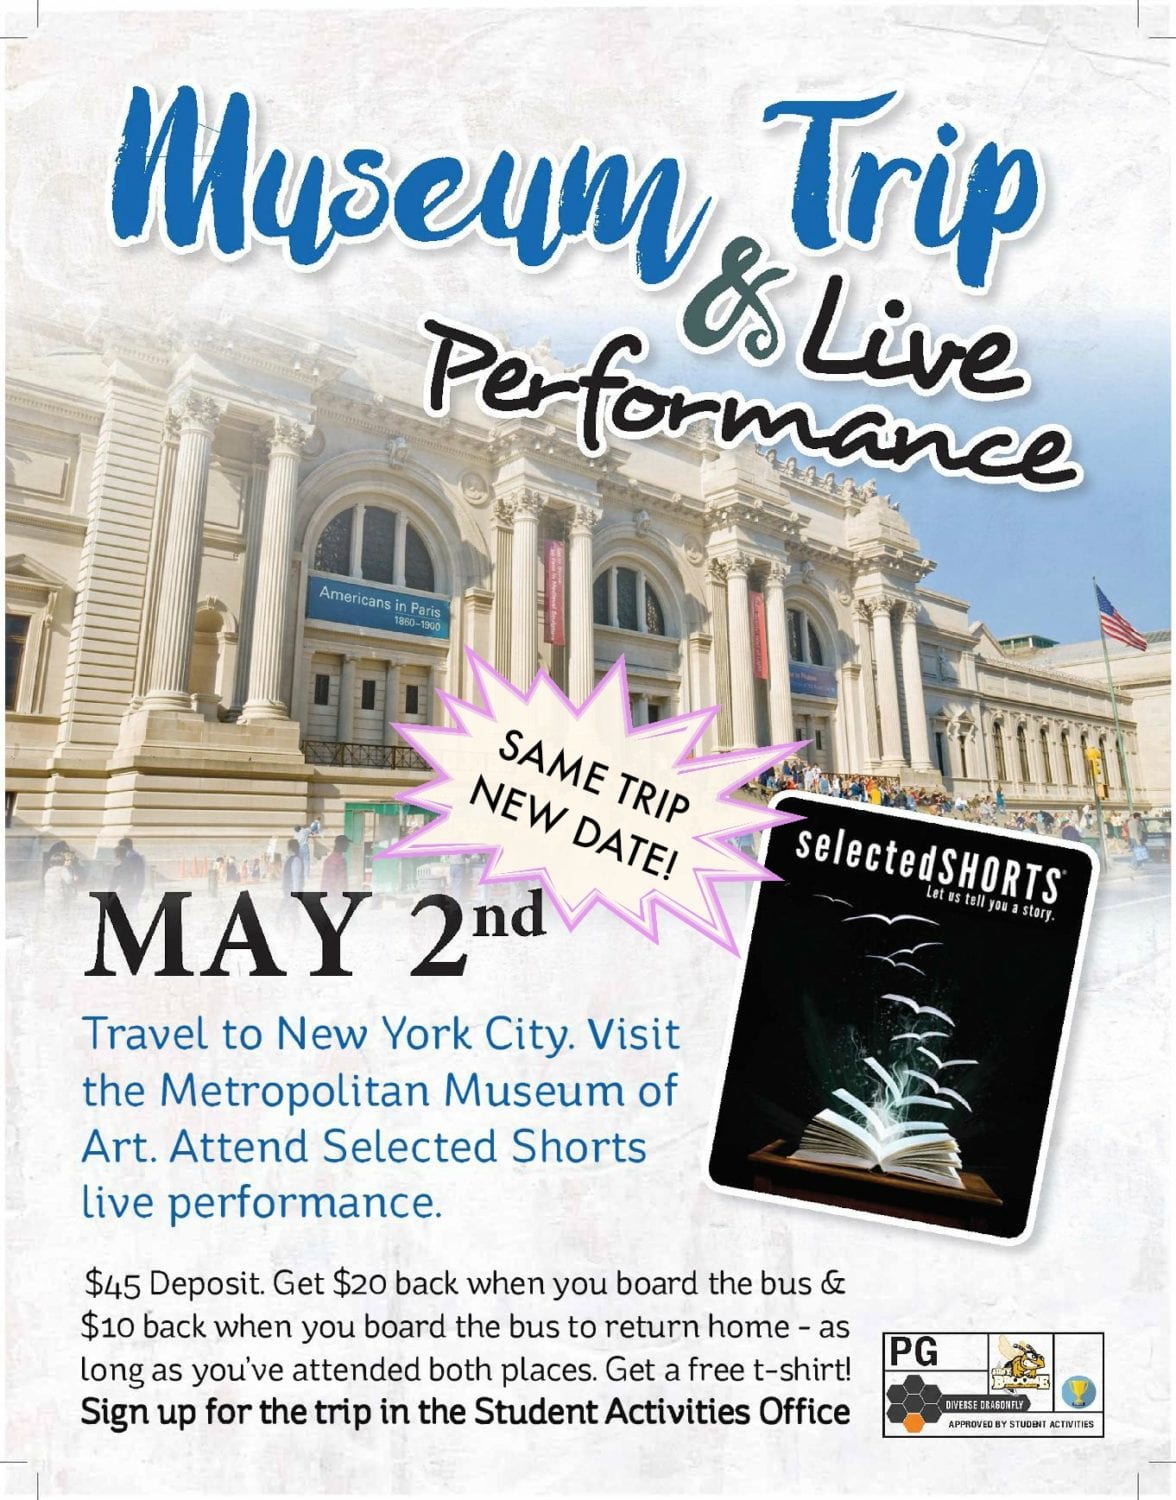 NYC Museum Trip & Live Performance on May 2